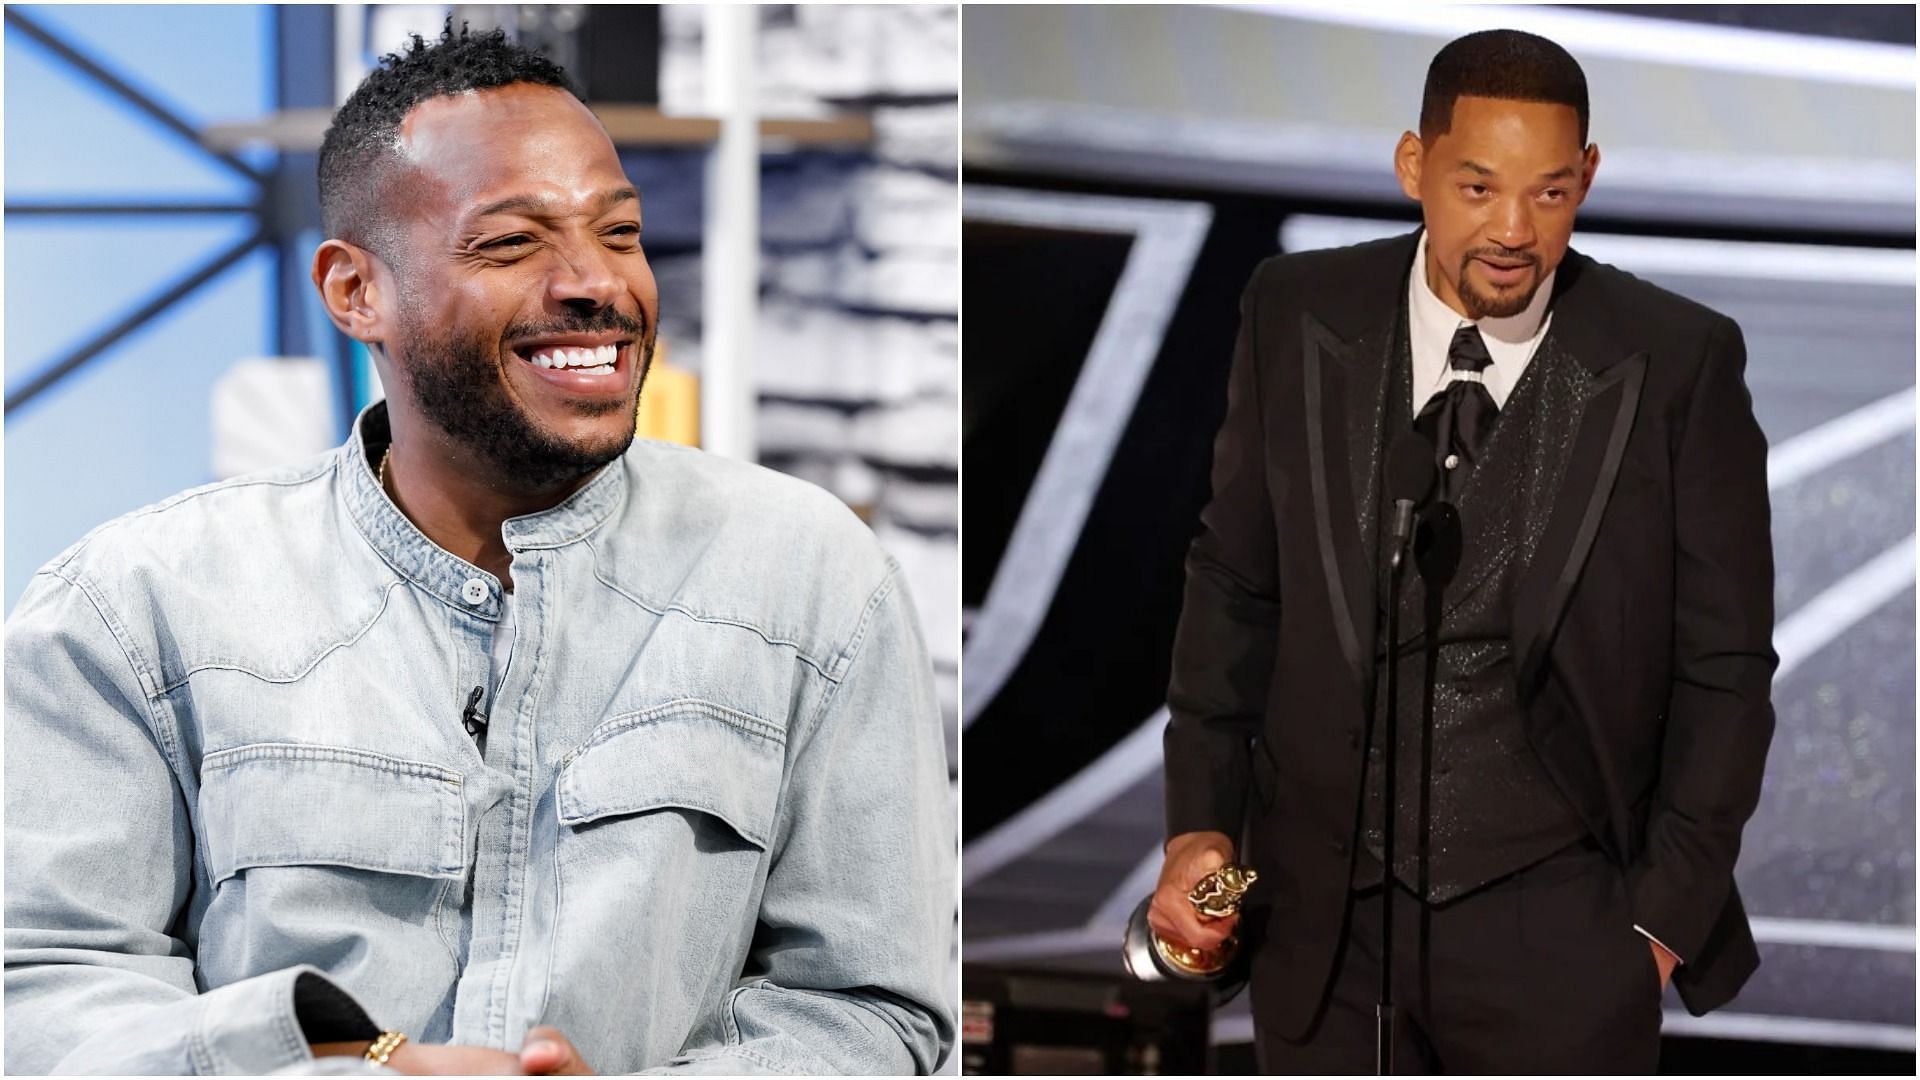 Marlon Wayans on Will Smith Oscars 2022 incident (Image via Rich Polk/Getty Images)